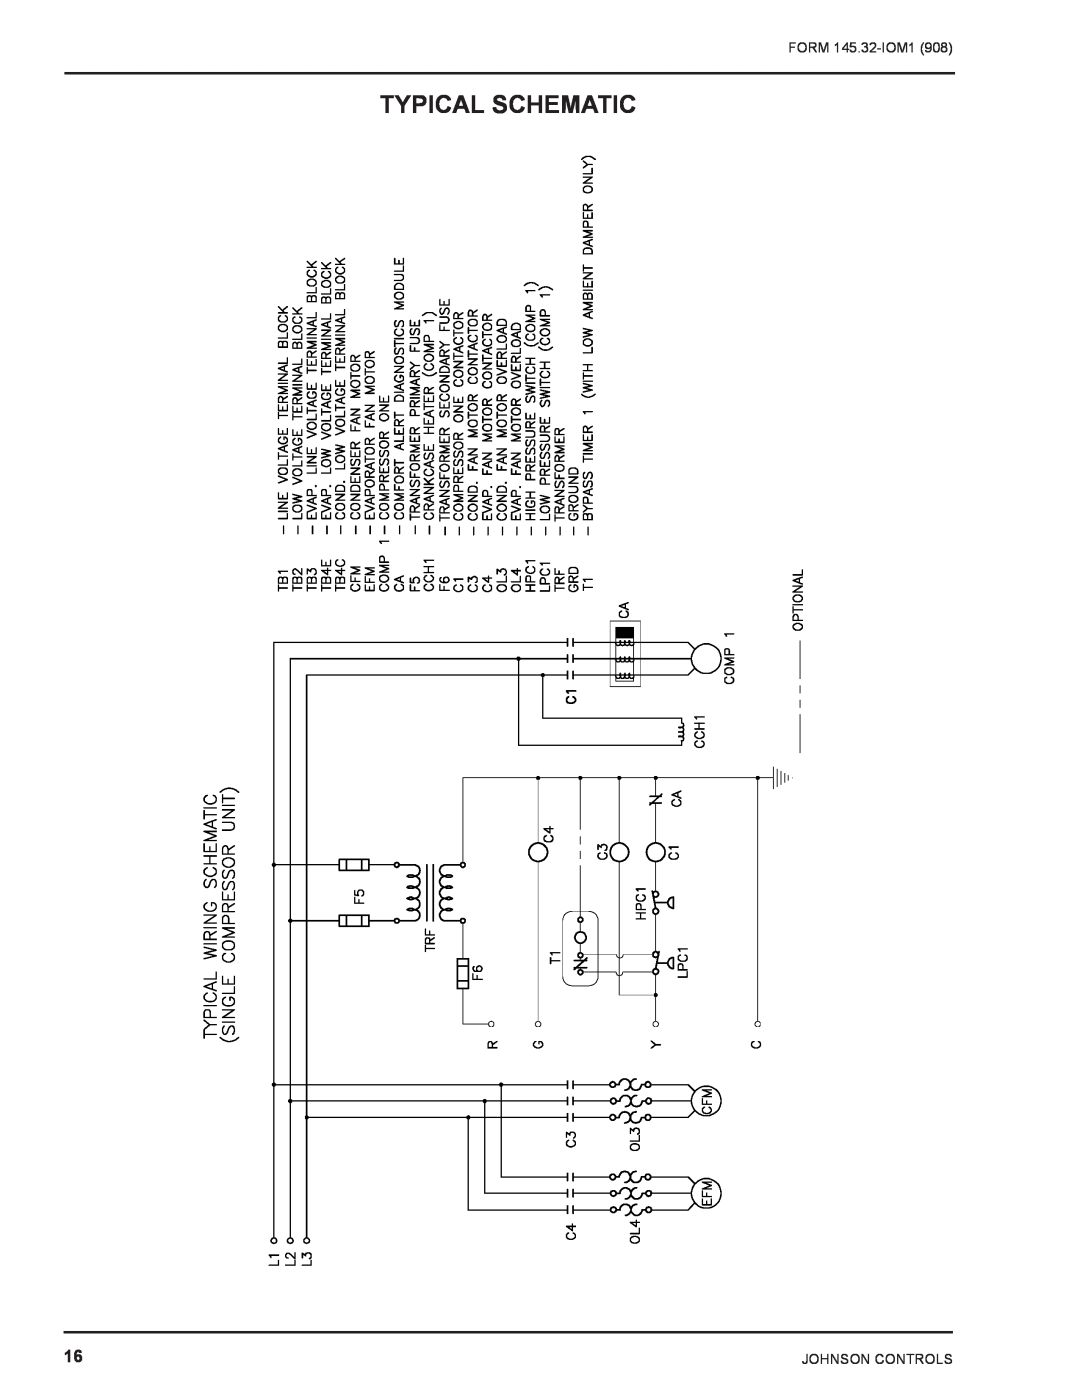 Energy Tech Laboratories DSH installation instructions Typical Schematic, FORM 145.32-IOM1908, Johnson Controls 